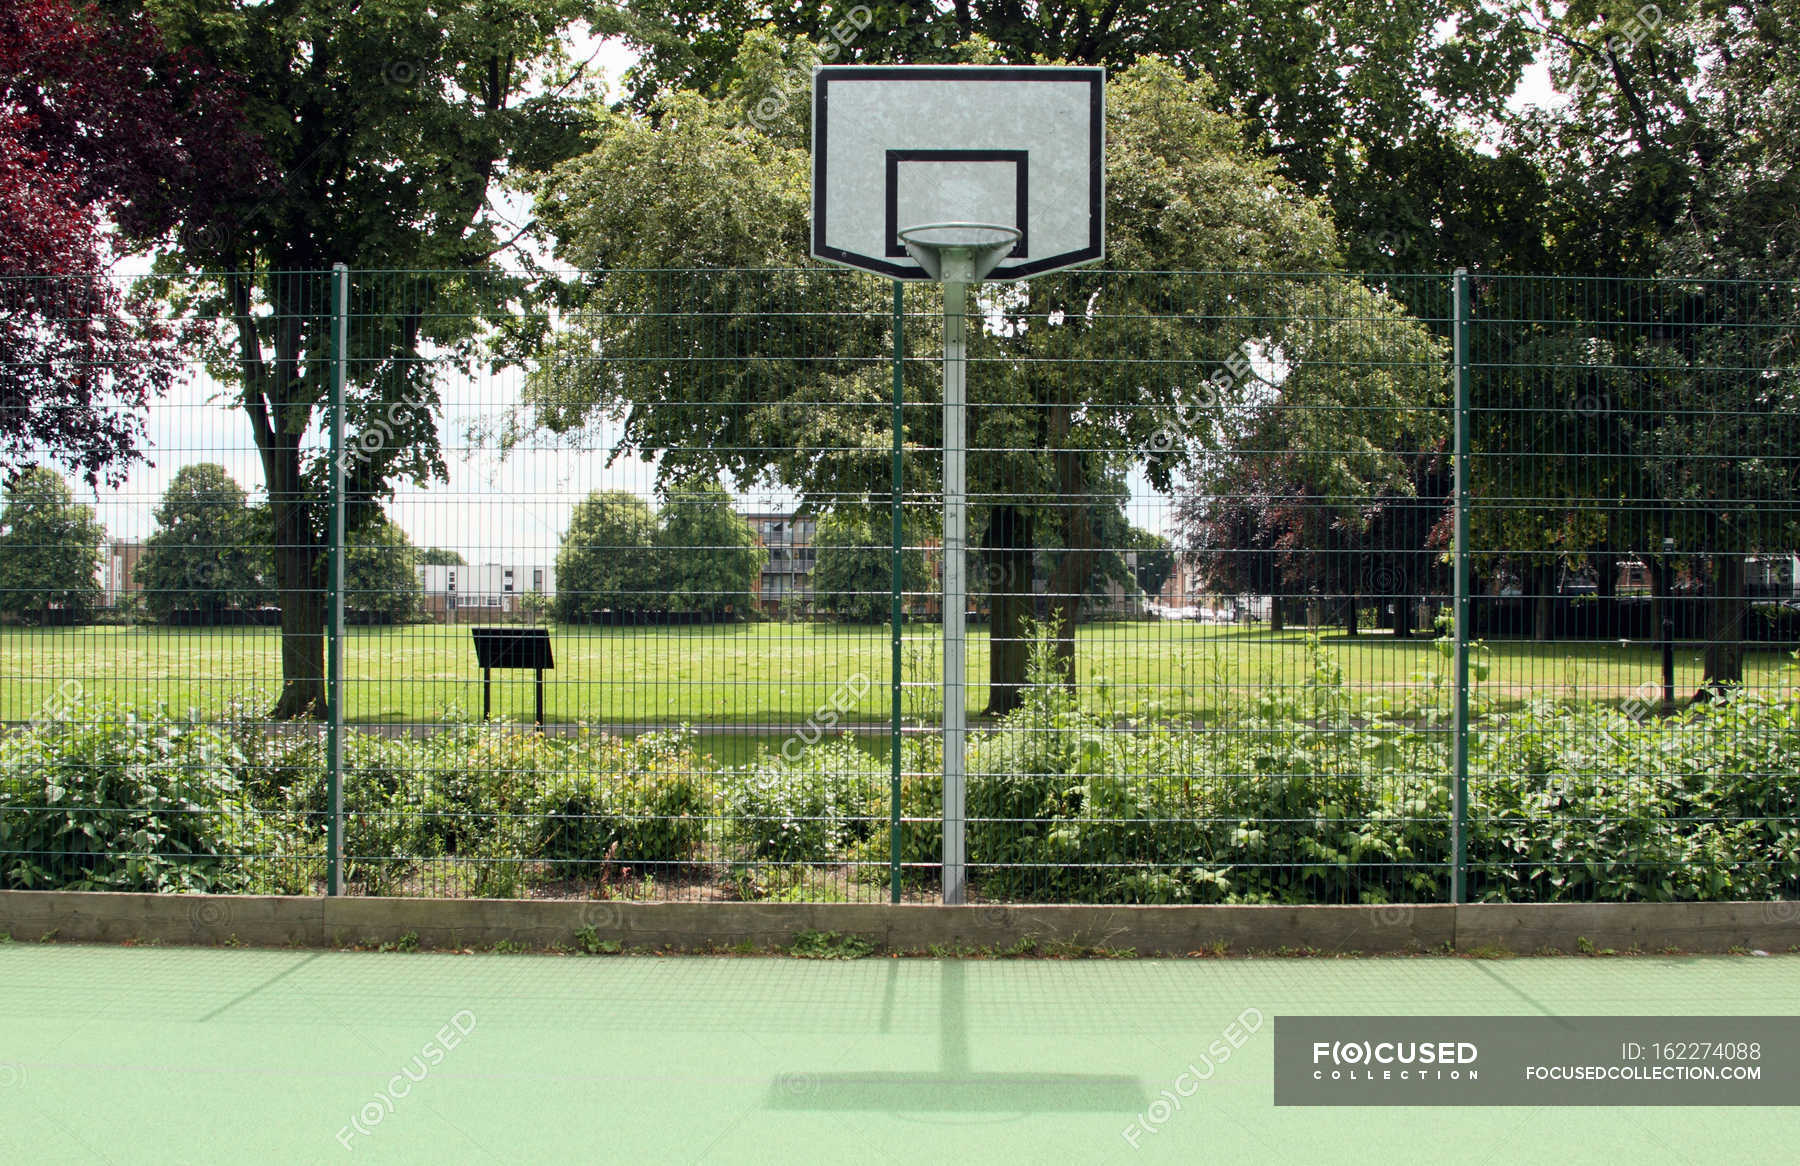 Focused 162274088 Stock Photo Basketball Court In City Park 